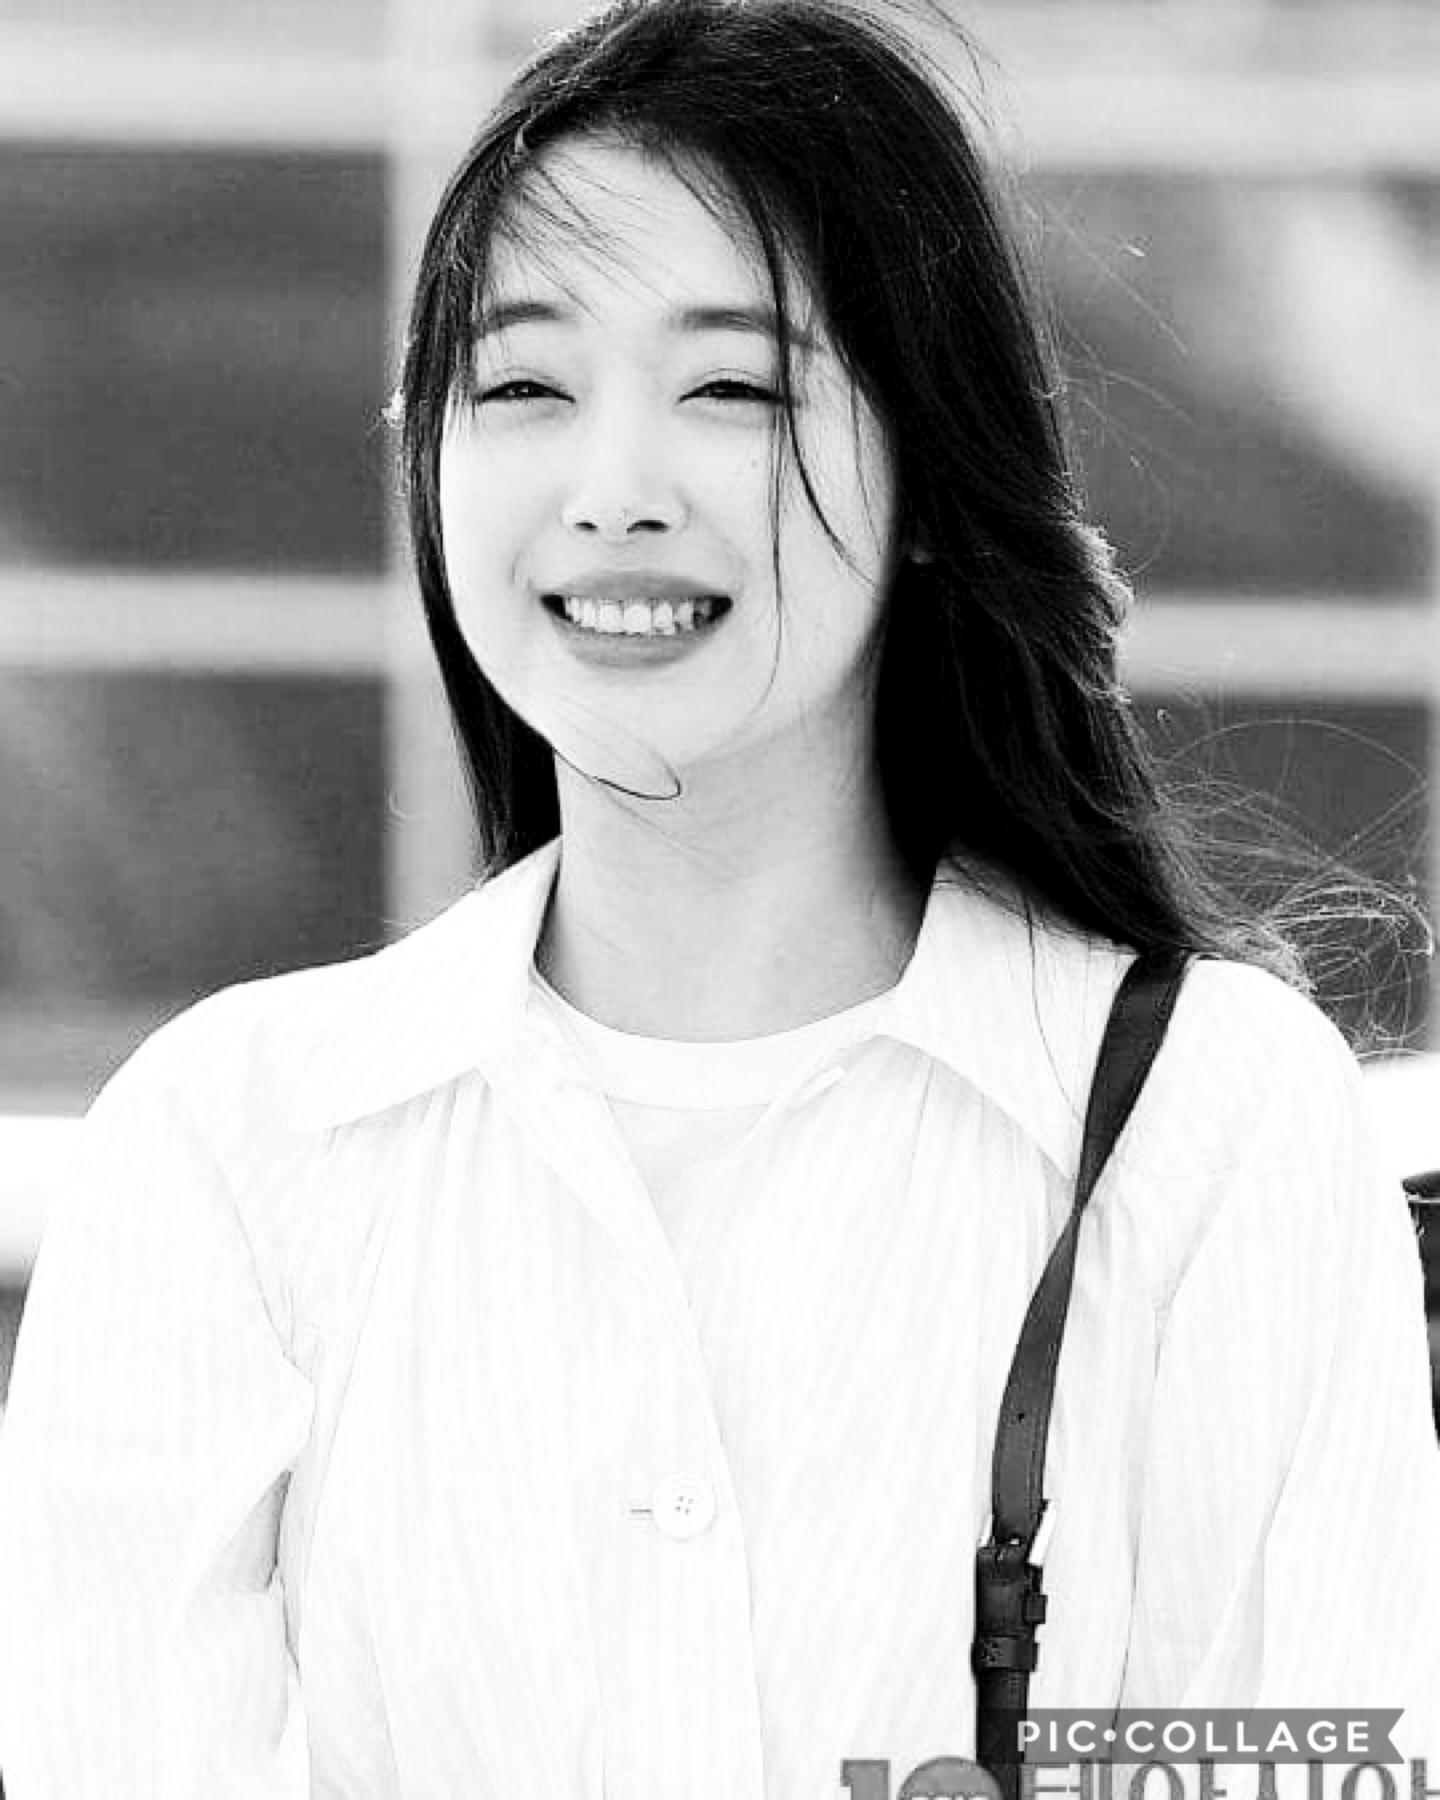 RIP Sulli and hope that you will forever remain in our hearts